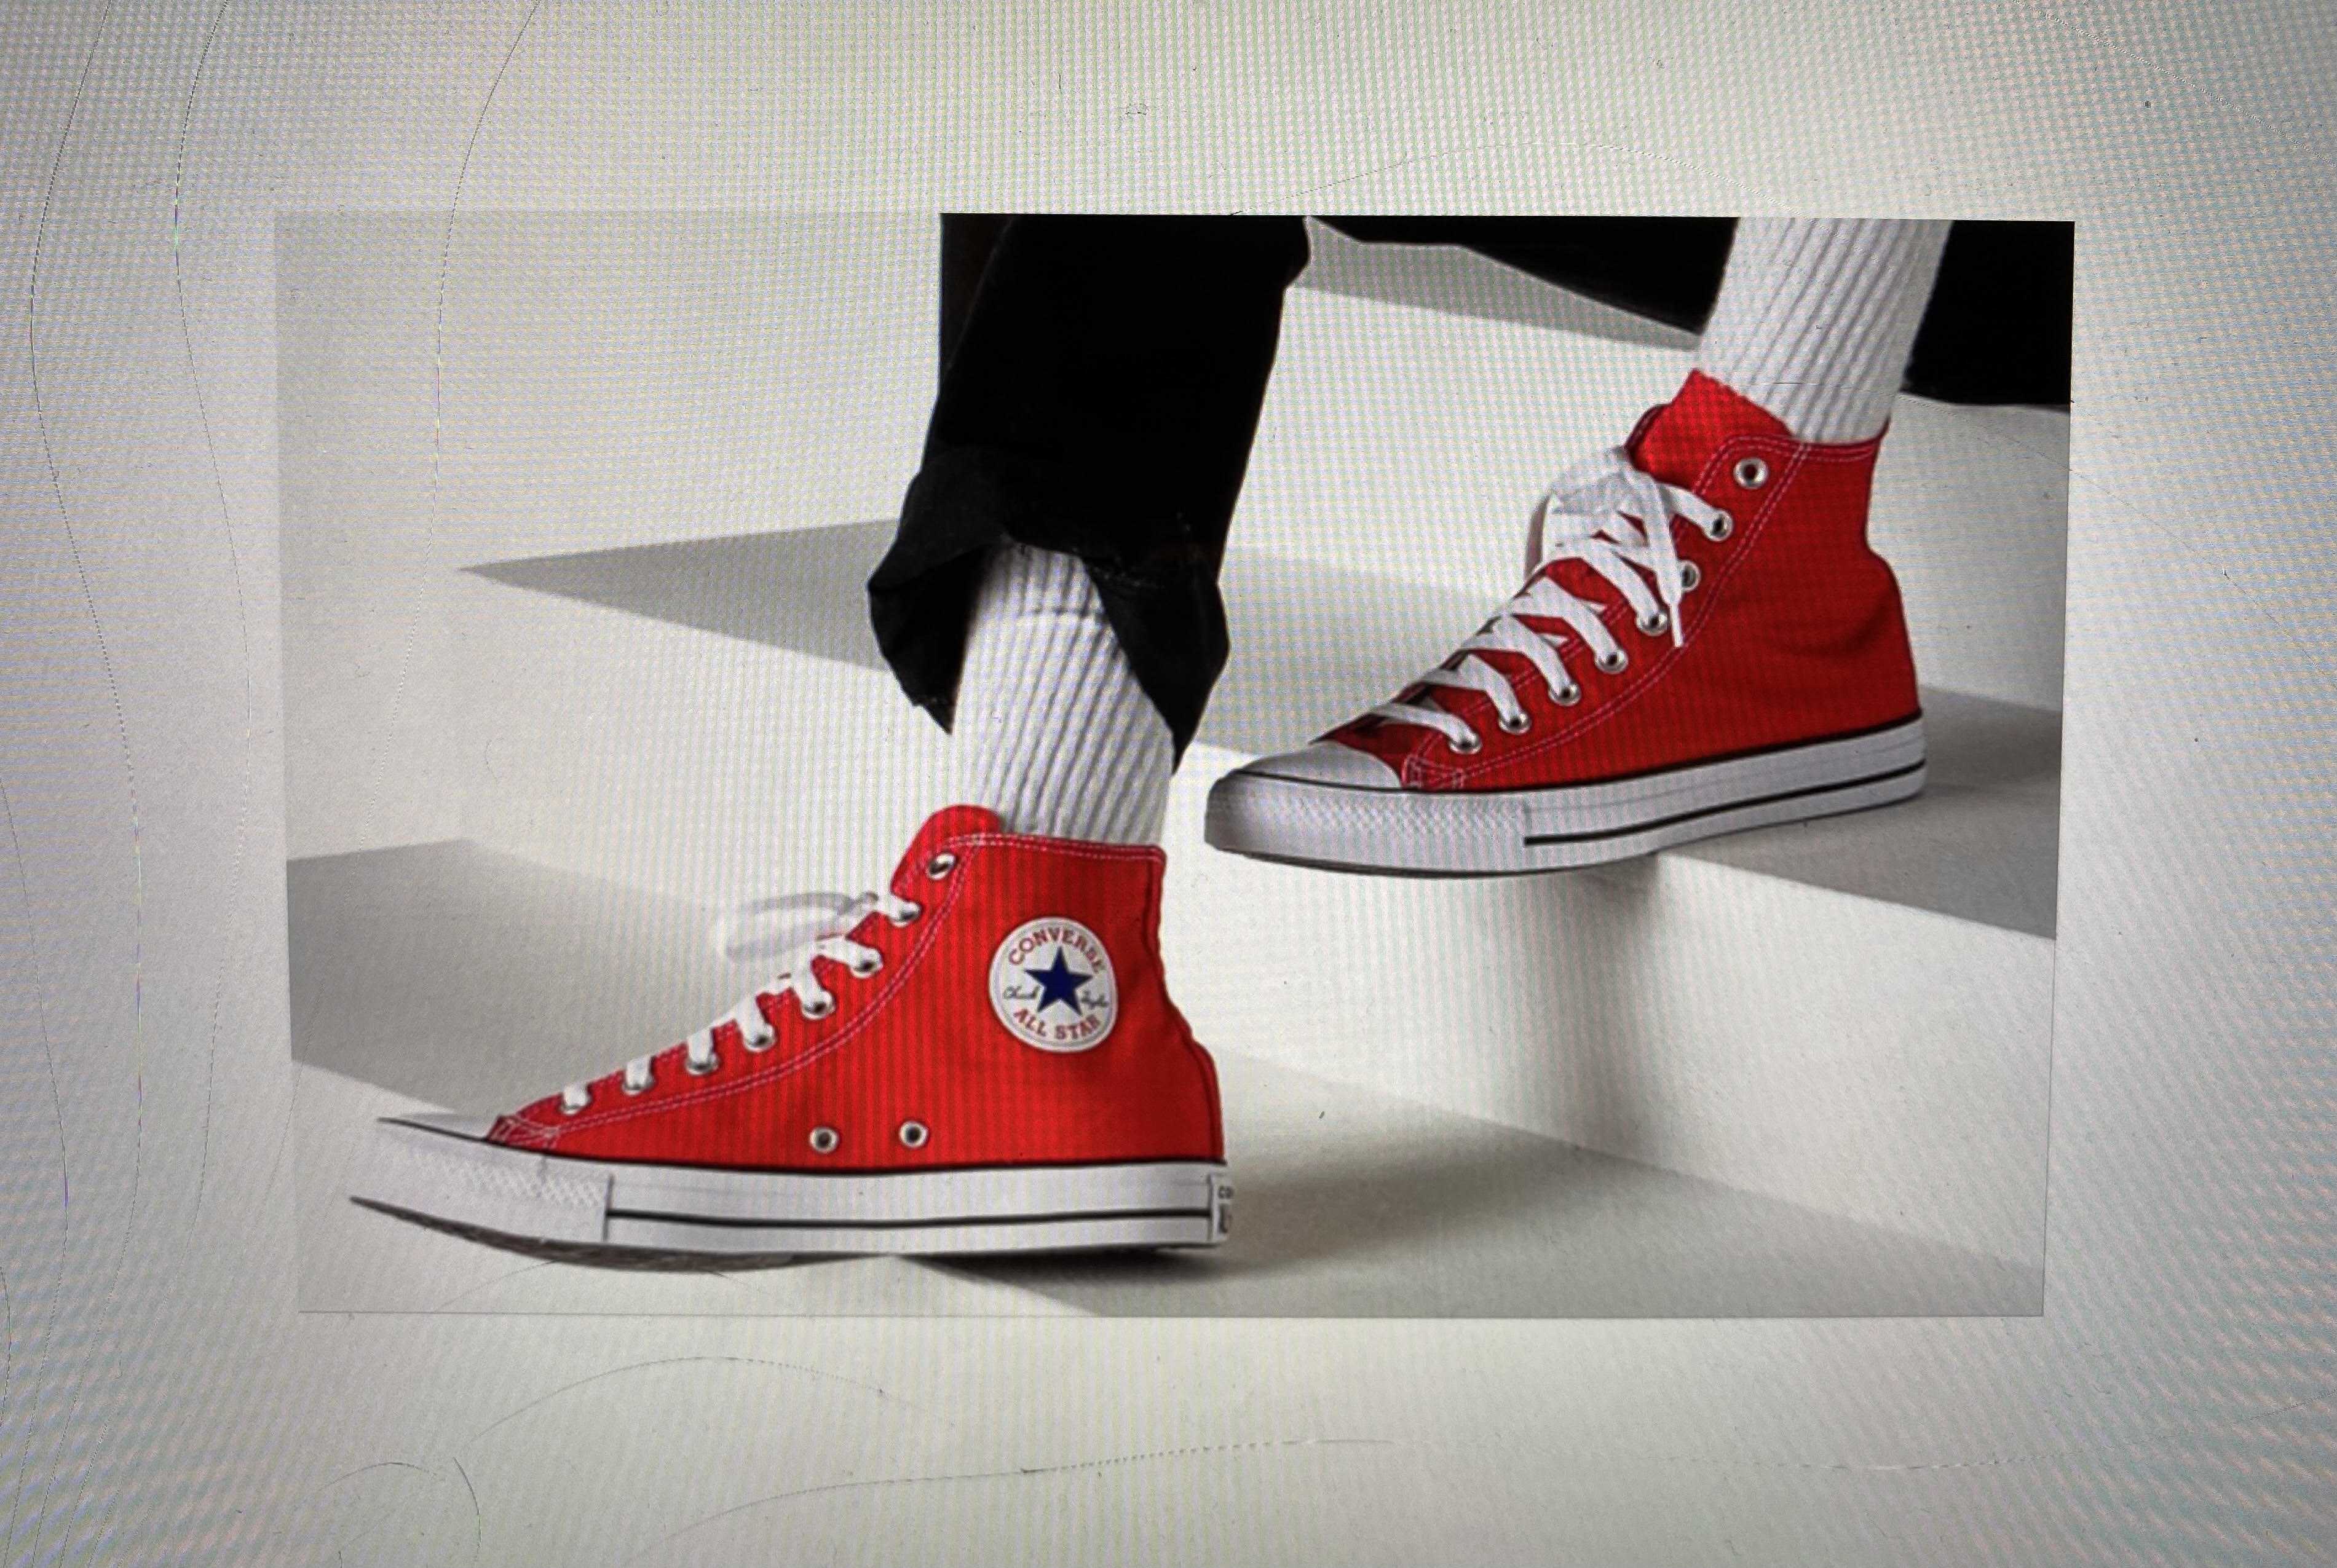 A conversation about Converse's timeless shoe · The Badger Herald